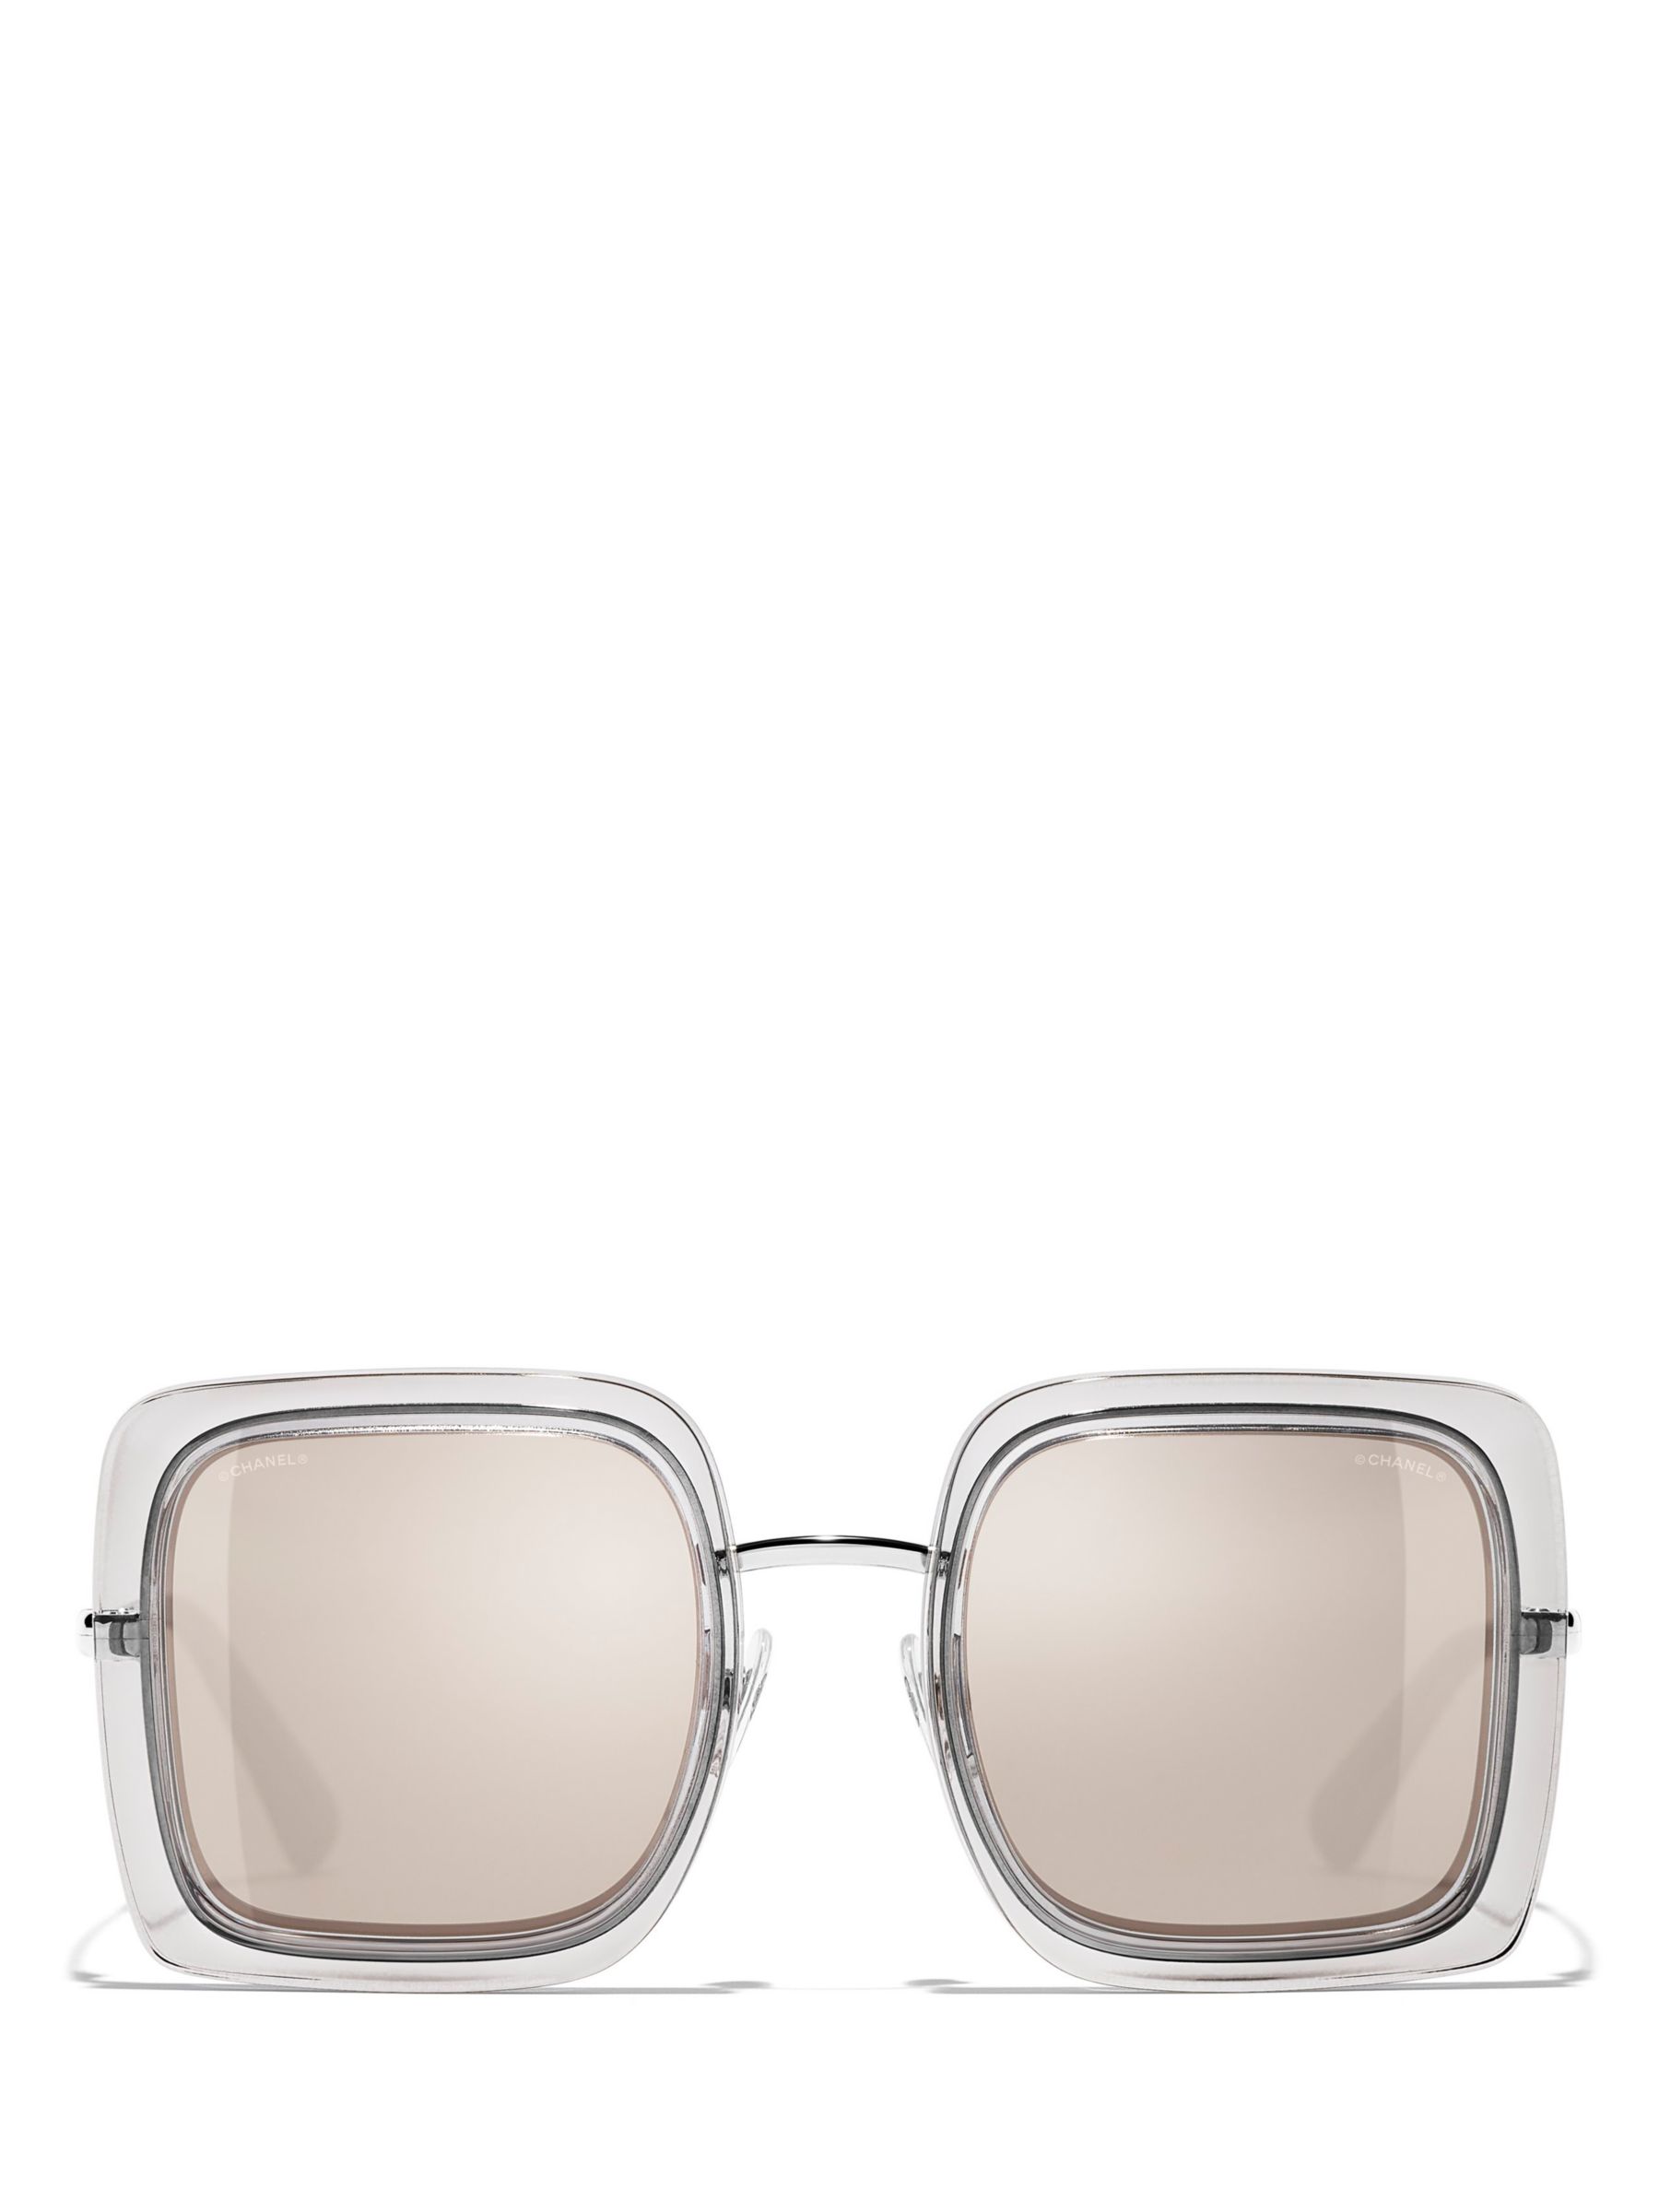 Buy CHANEL Square Sunglasses CH4240 Grey/Mirror Clear Online at johnlewis.com